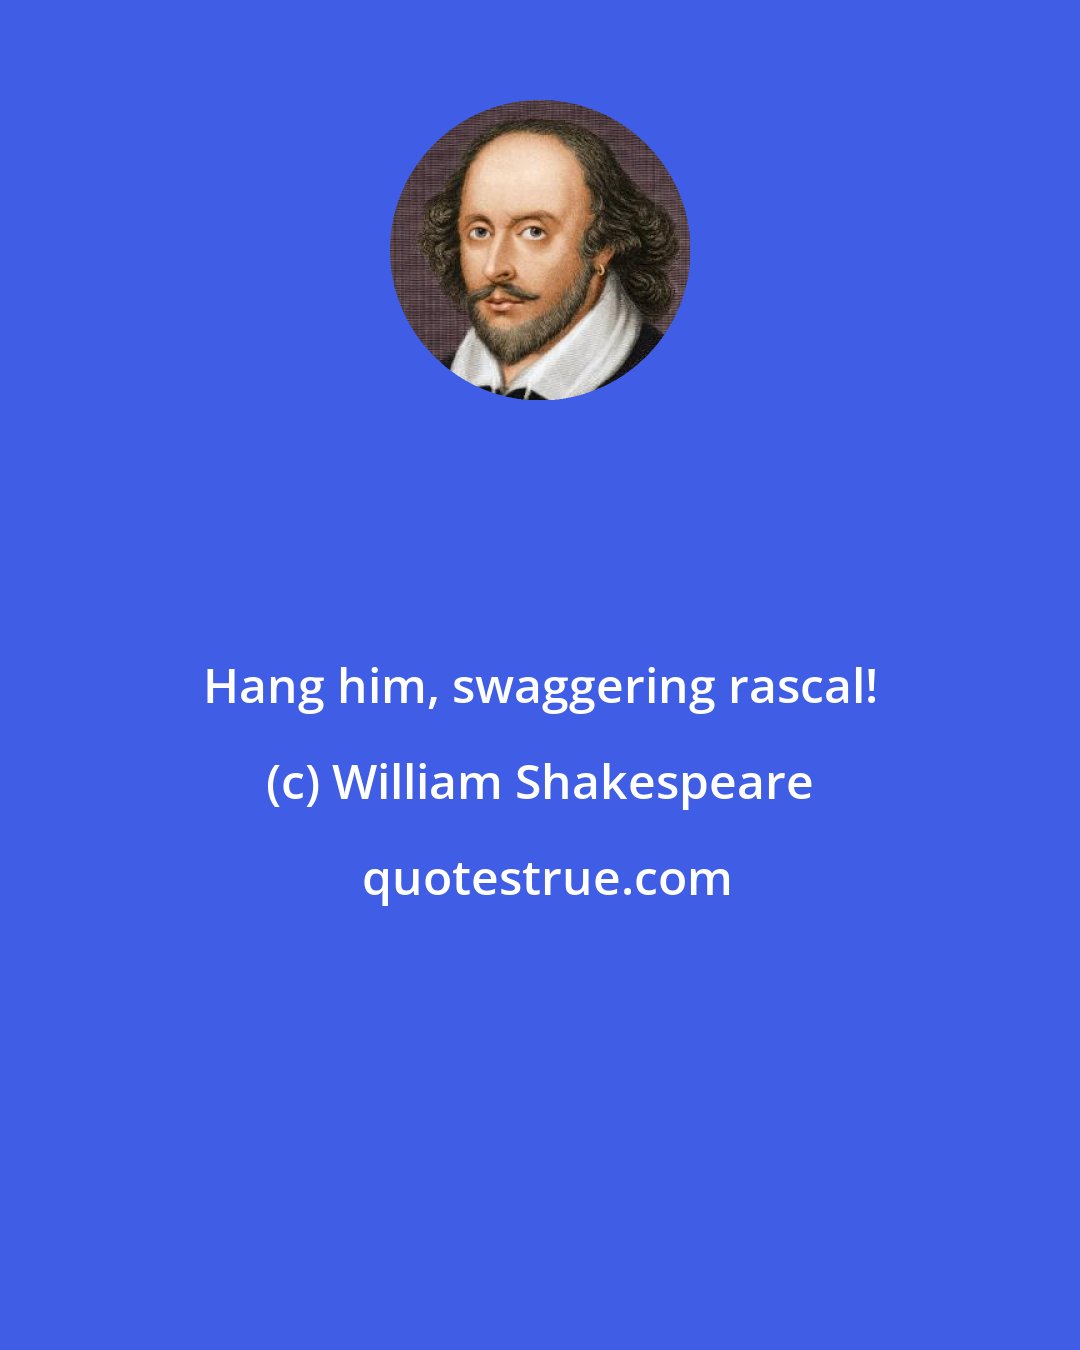 William Shakespeare: Hang him, swaggering rascal!